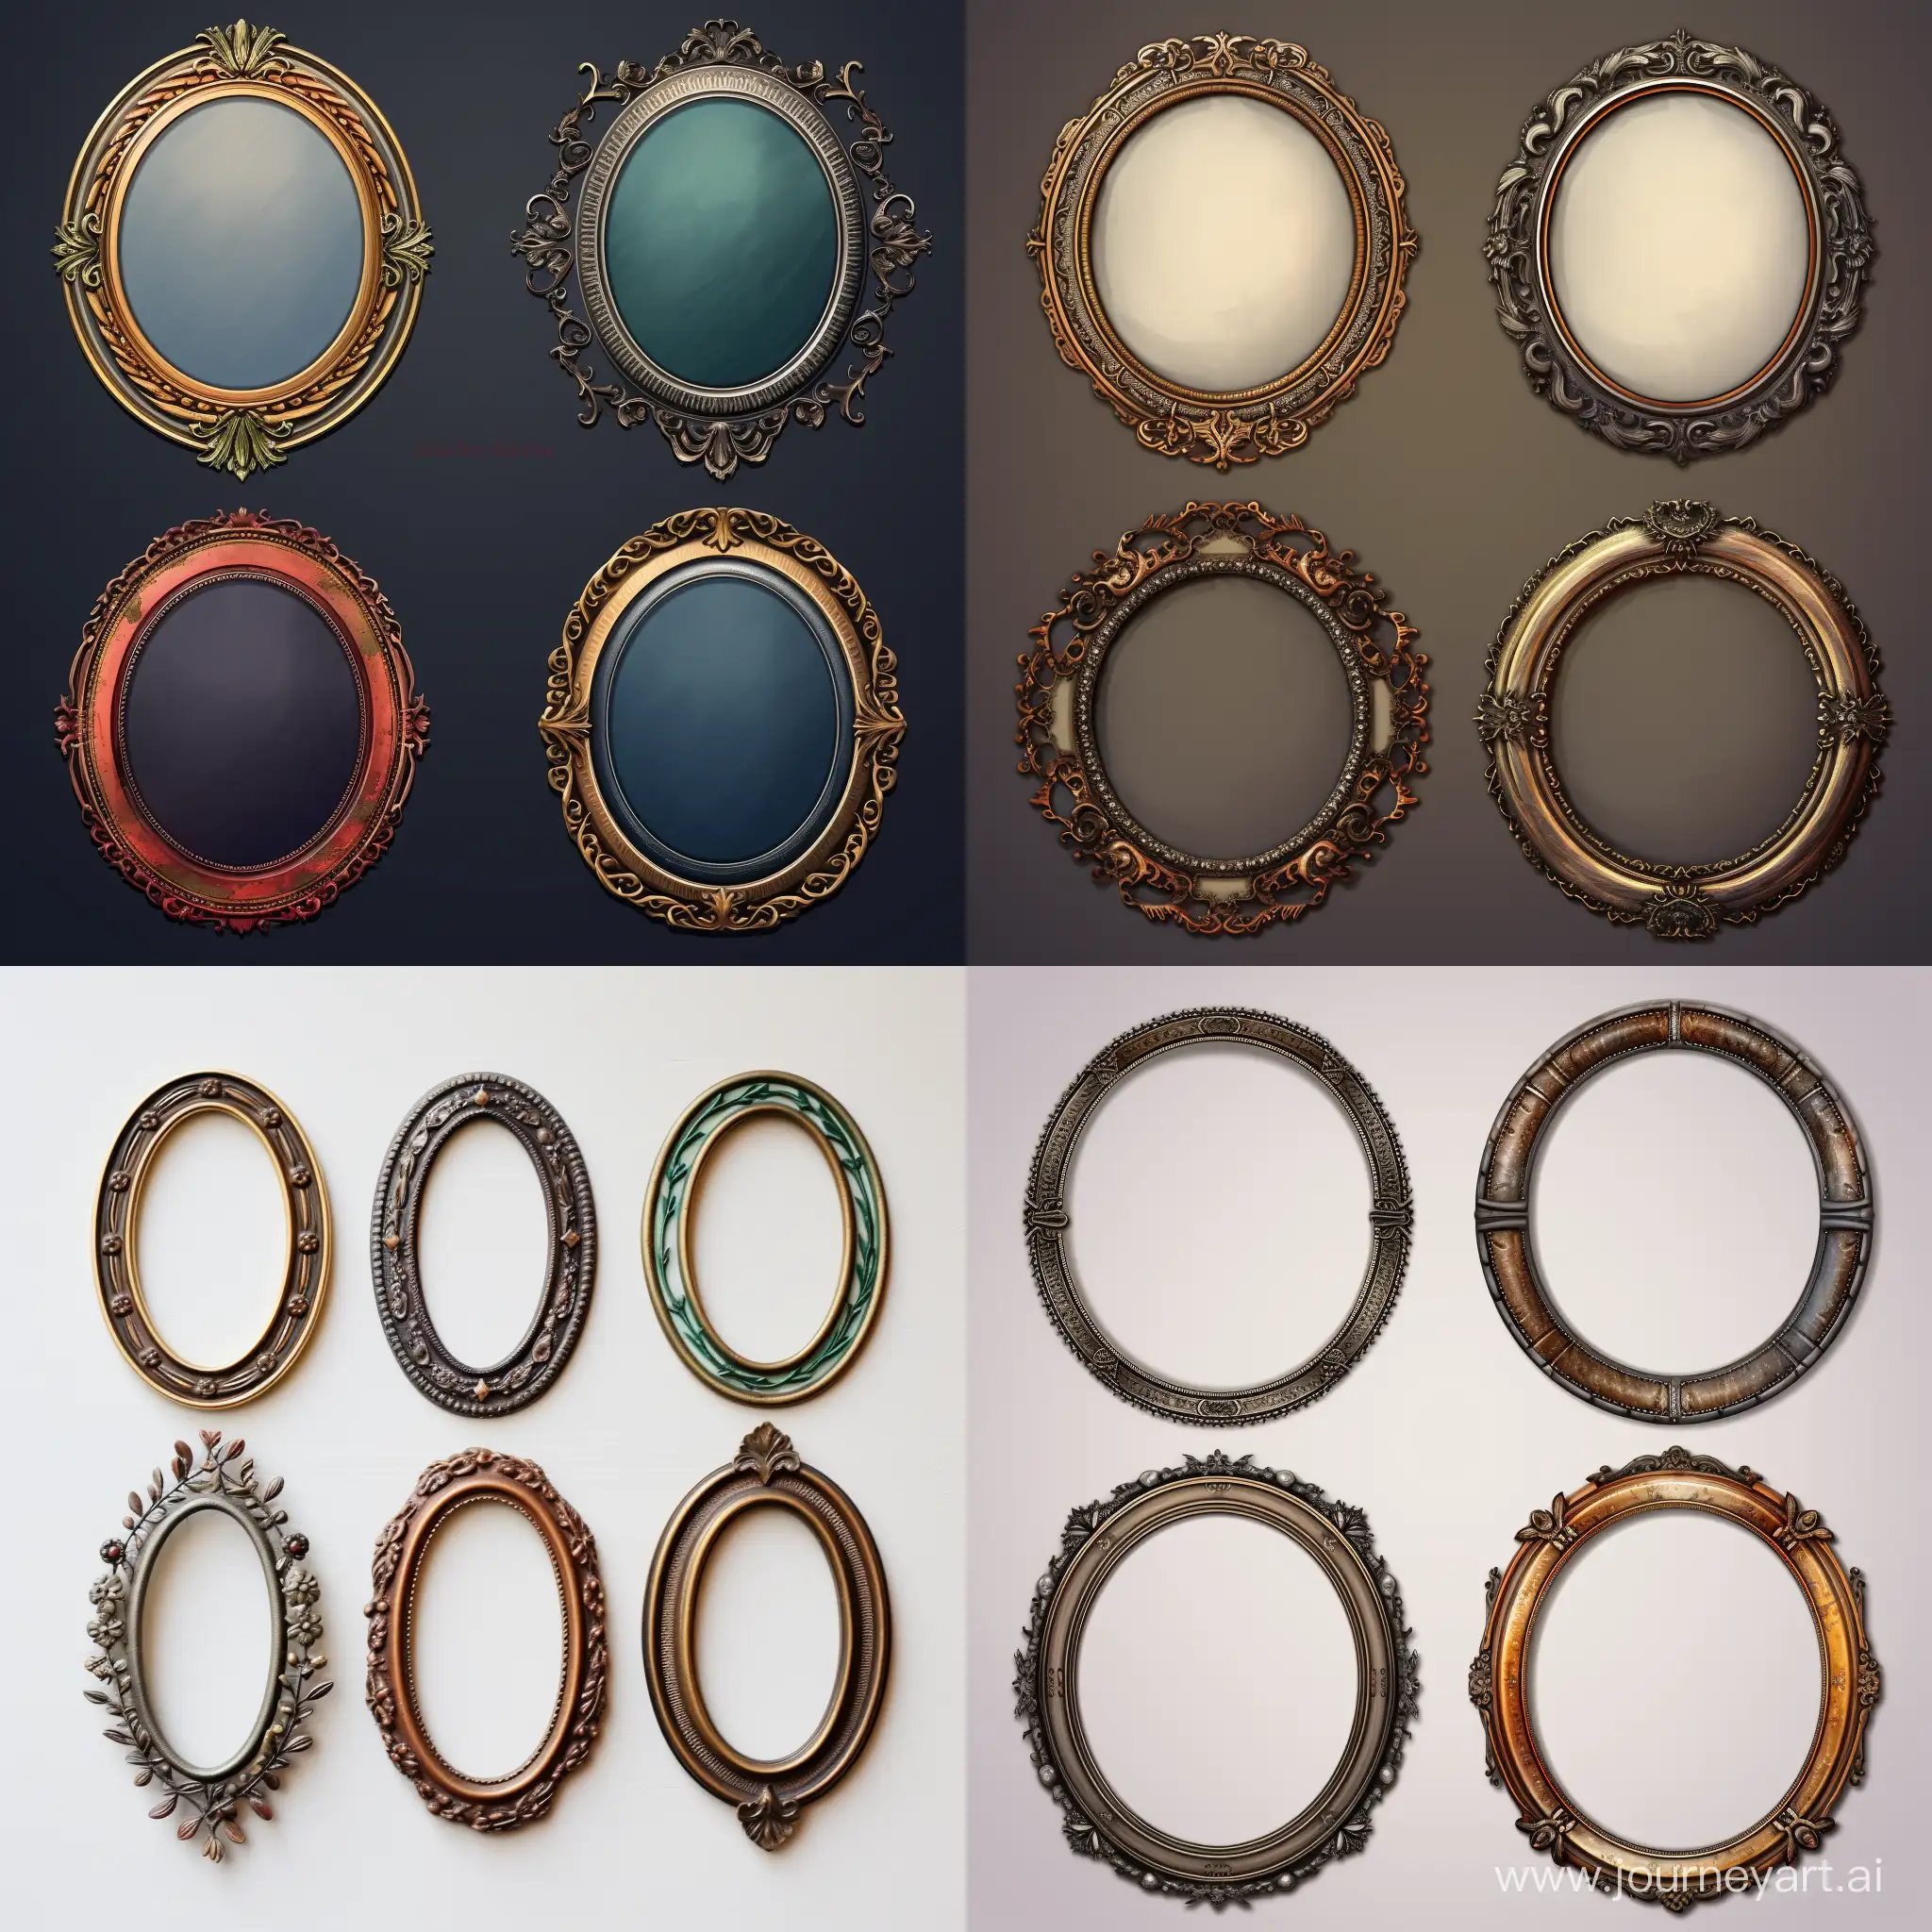 Antique-Ornament-Oval-Frame-Options-for-Artistic-Displays